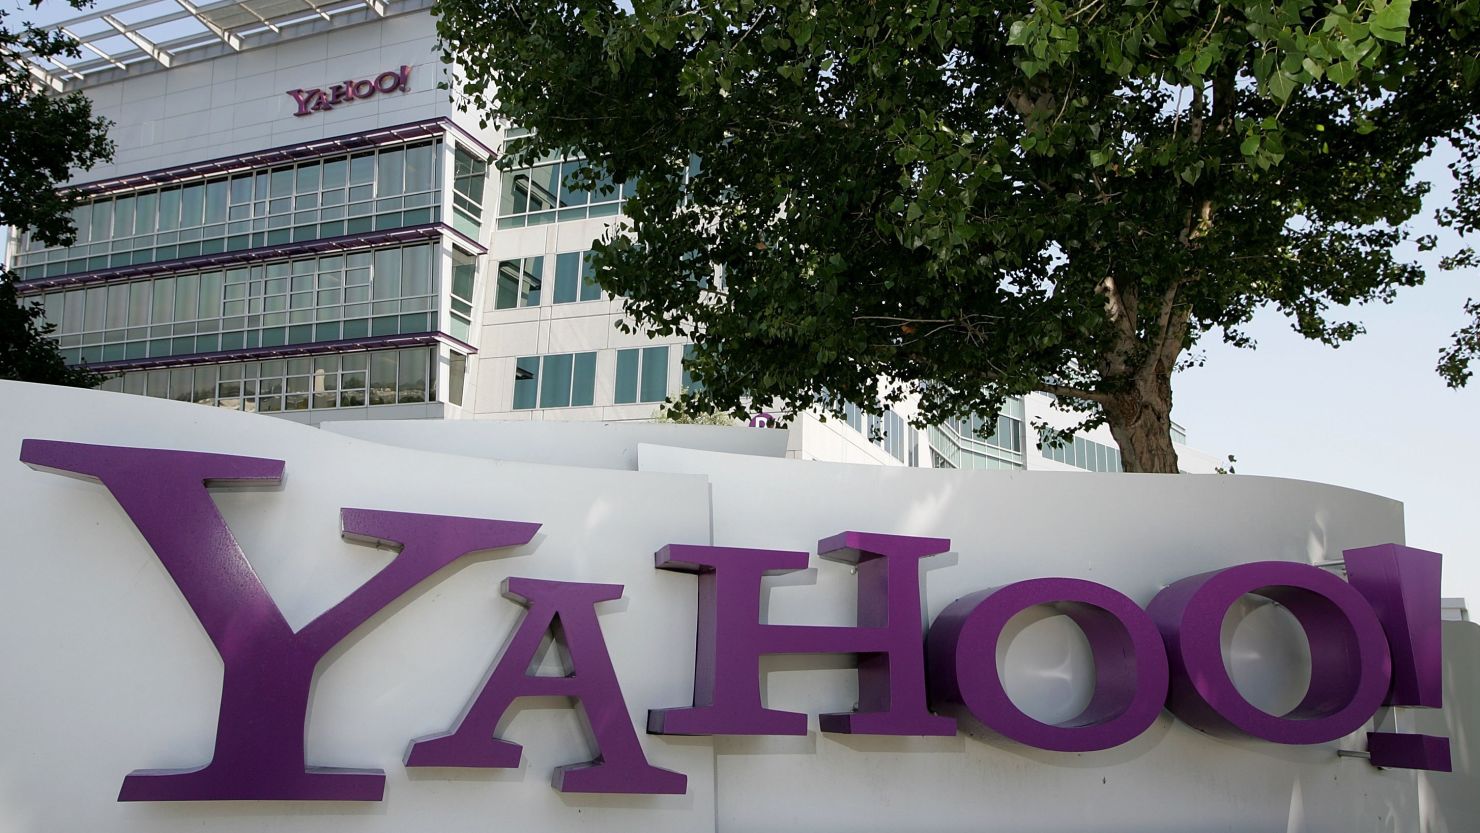 Yahoo! has filed a lawsuit against Facebook for alleged patent infringements.